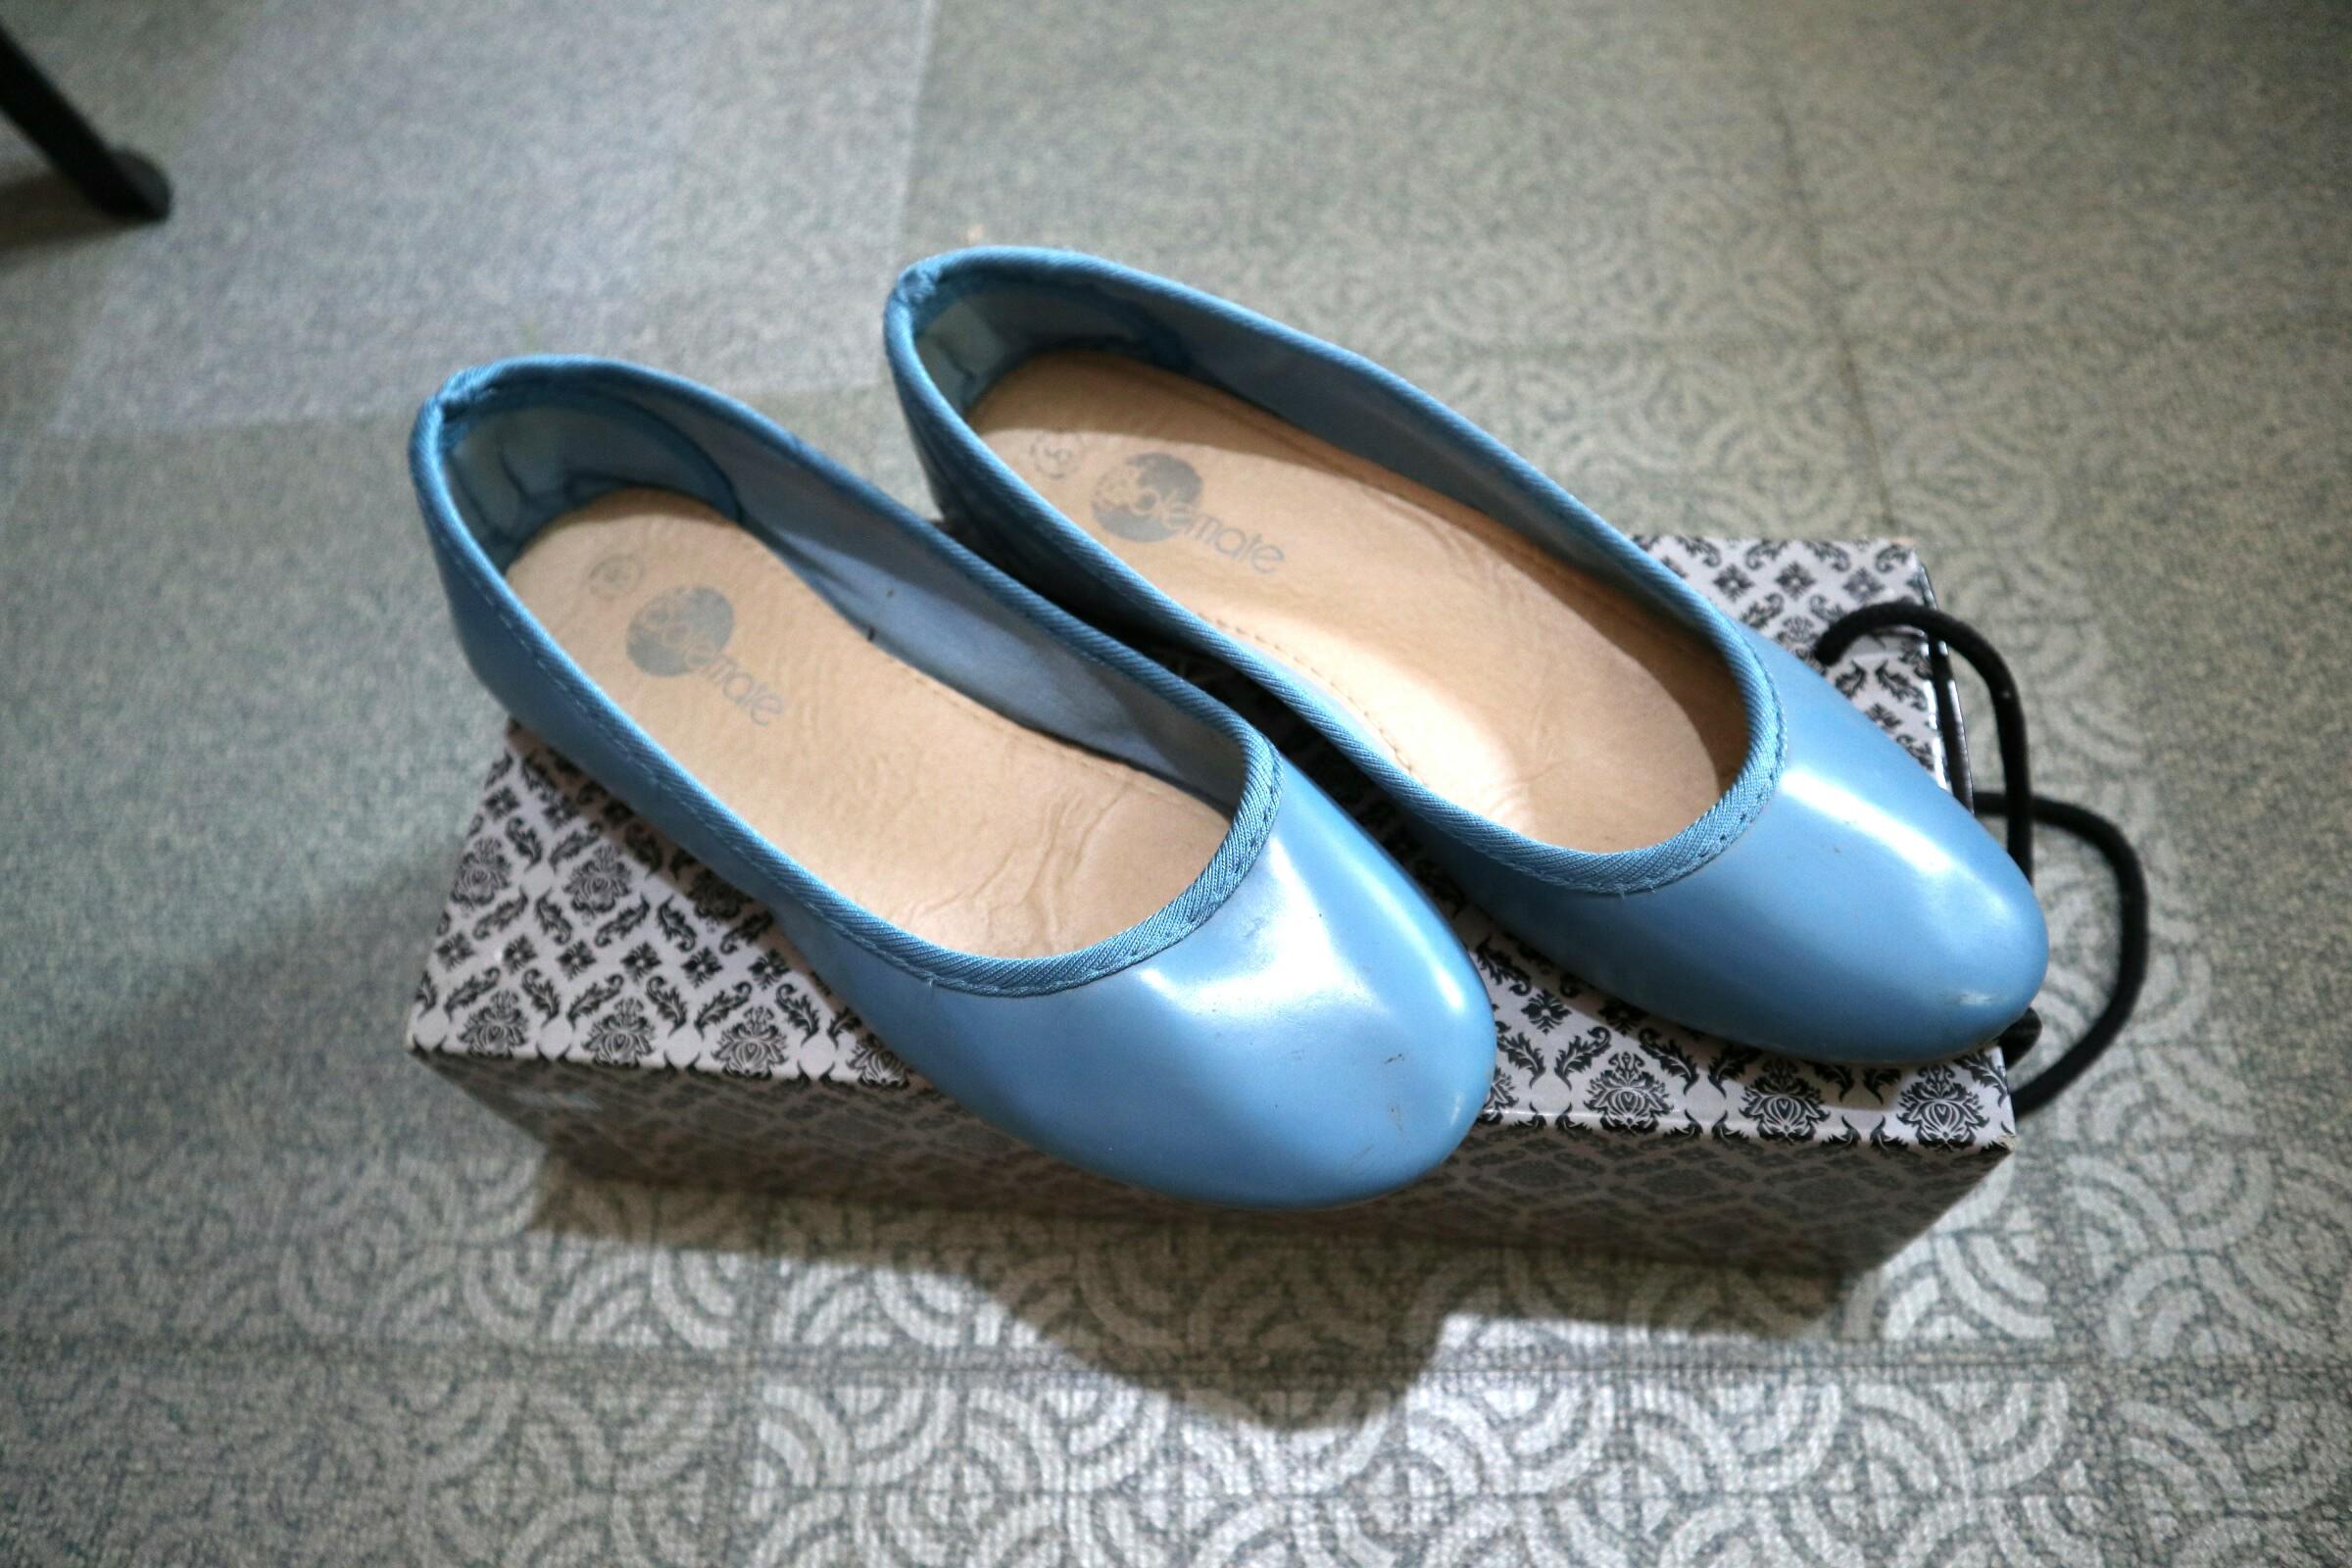 solemate doll shoes sm